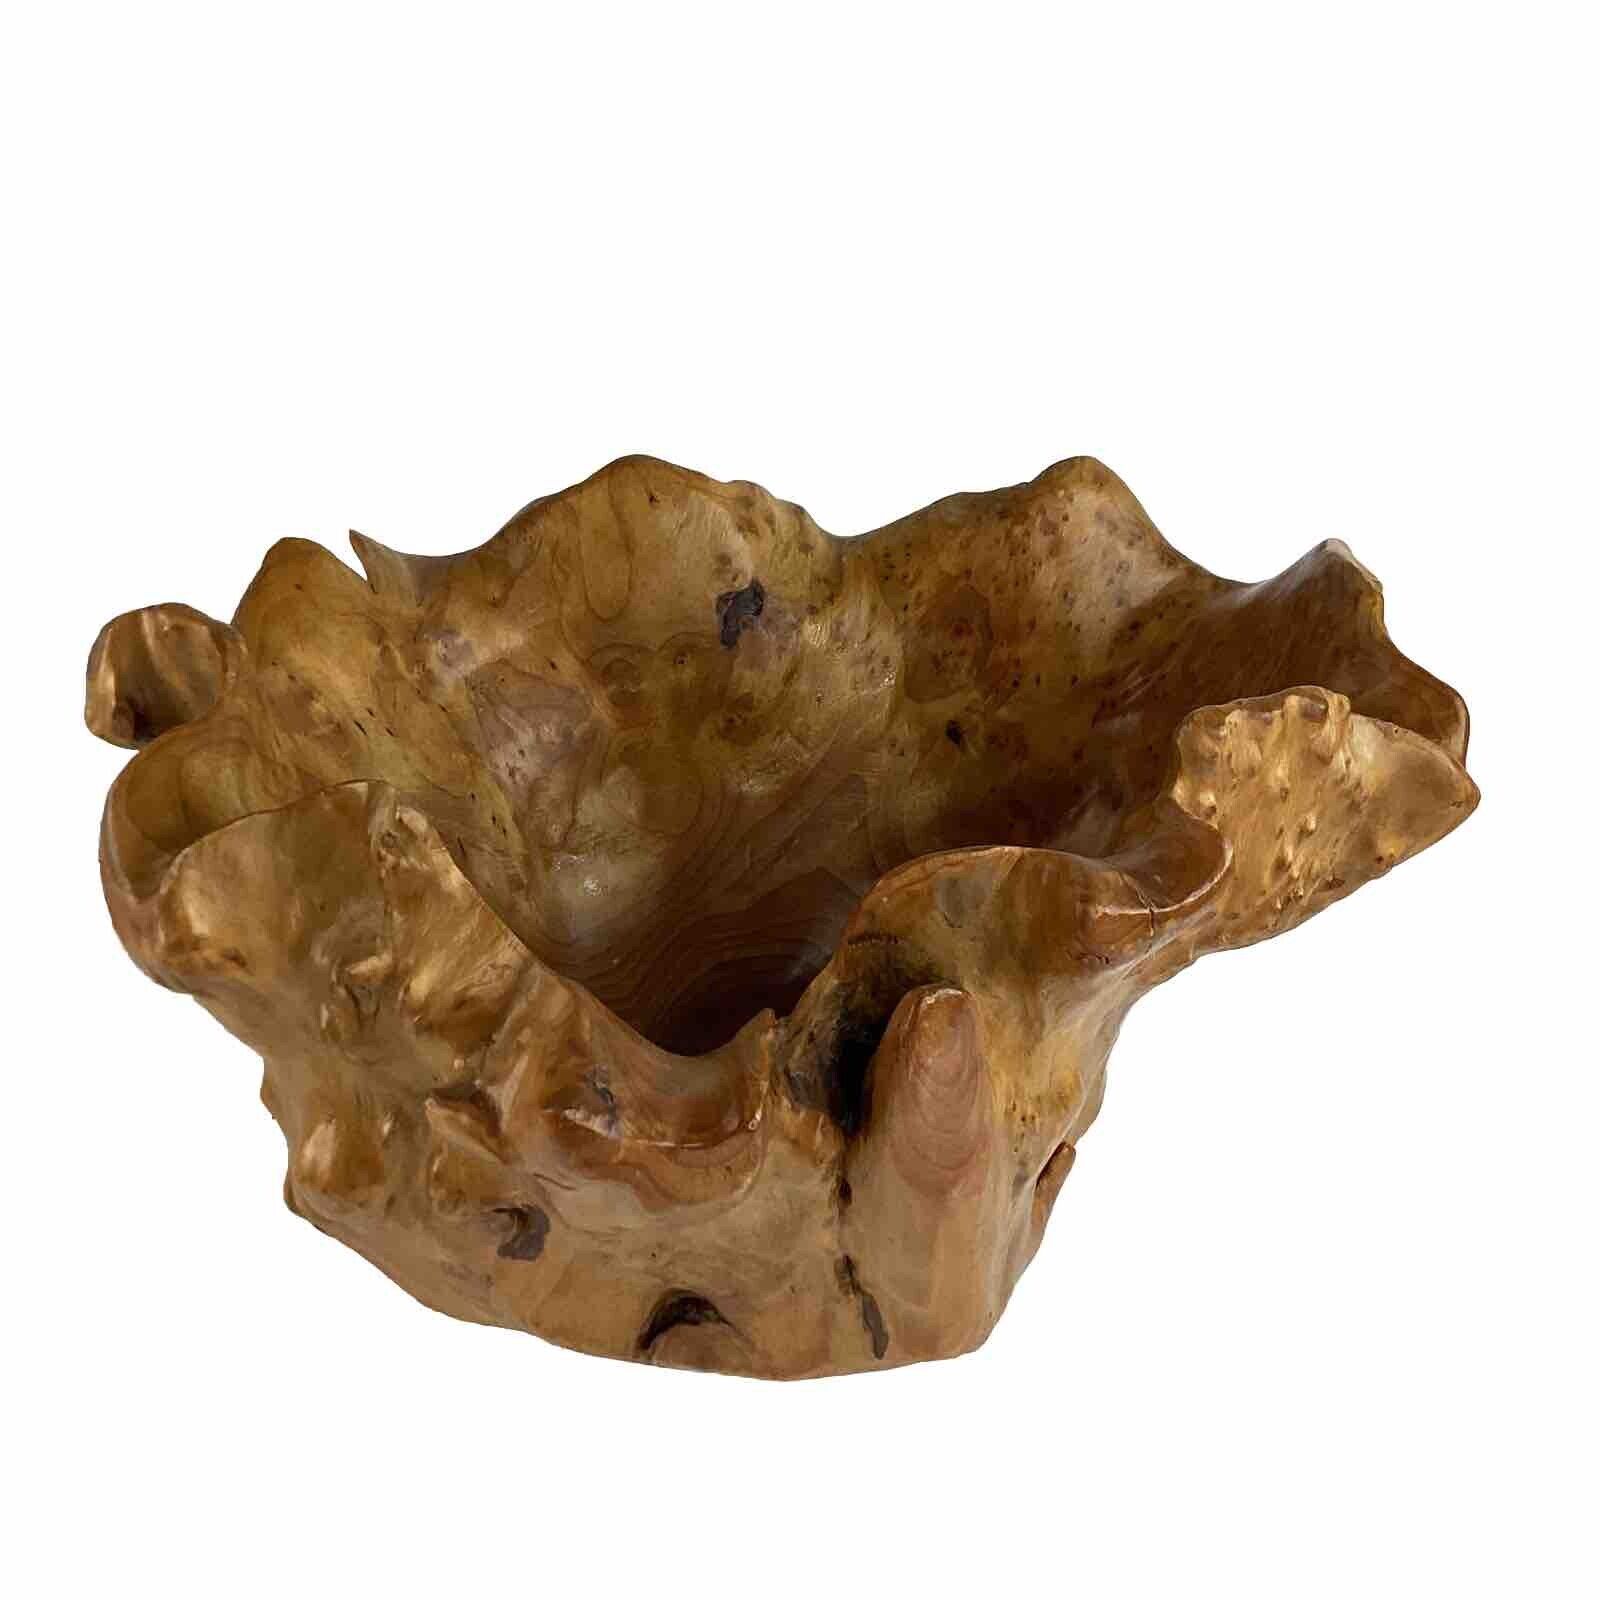 Natural hand Carved Knotted Wood Root Vessel Container Bowl Puerto Rican